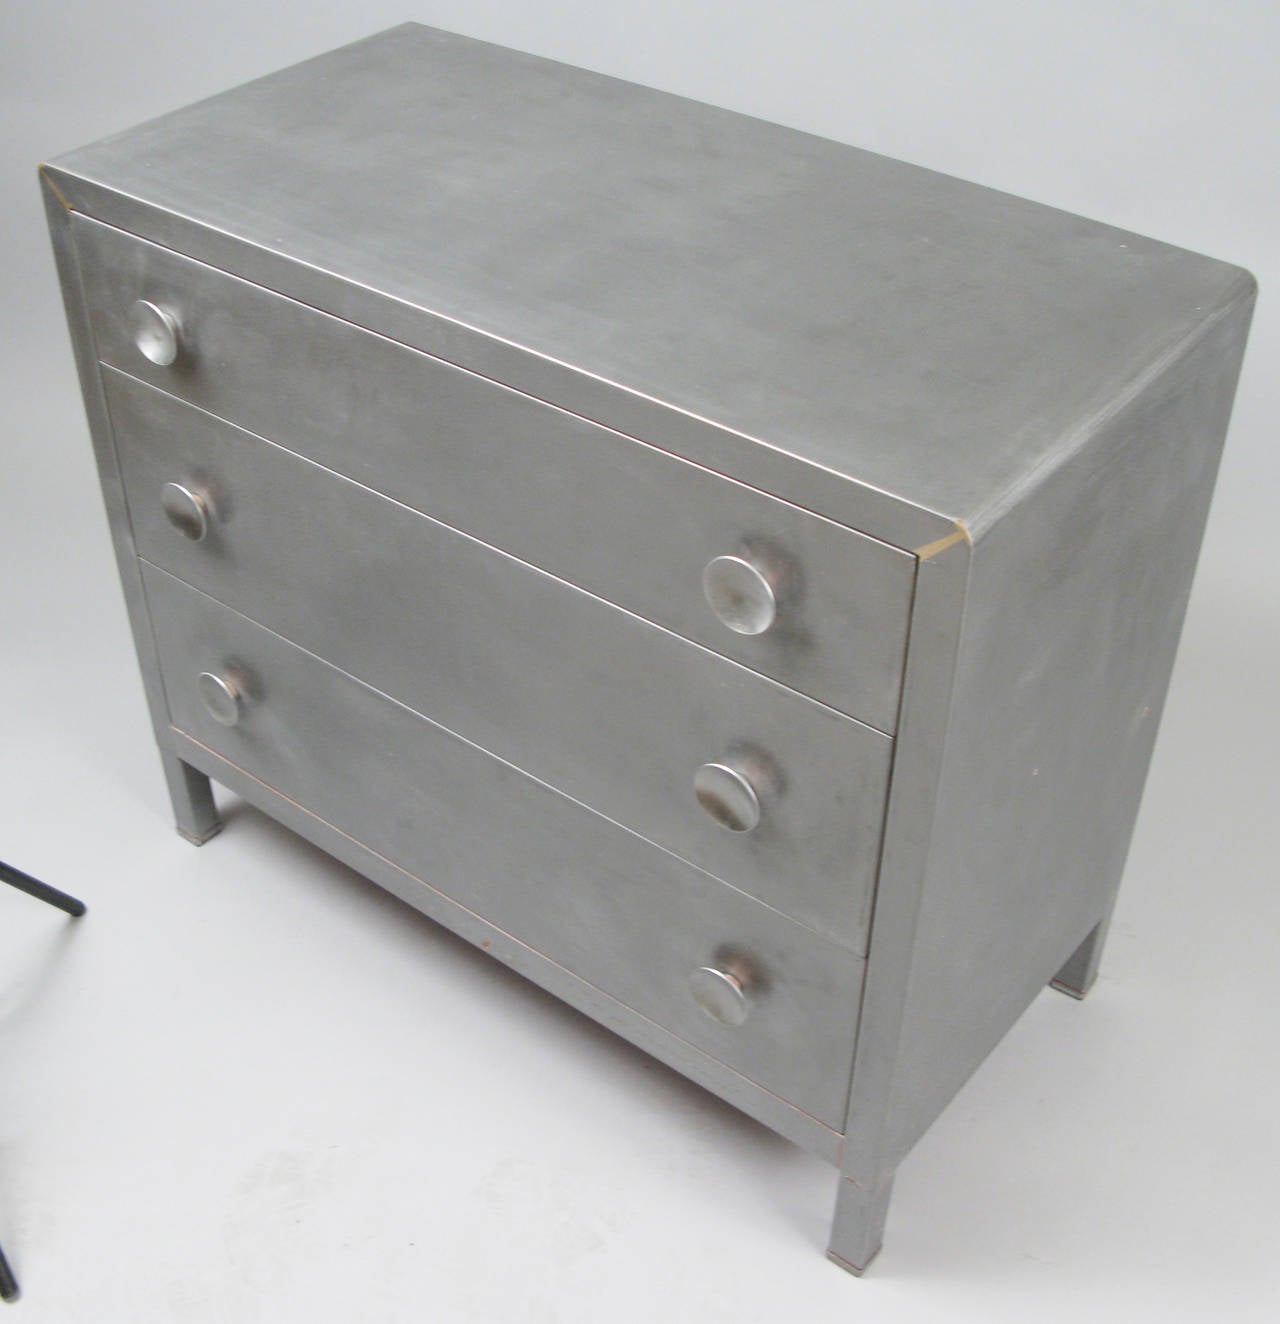 a very handsome vintage 1930's three drawer chest designed by Norman Bel Geddes for Simmons Furniture. classic art deco styling, beautifully stripped down to brushed steel.